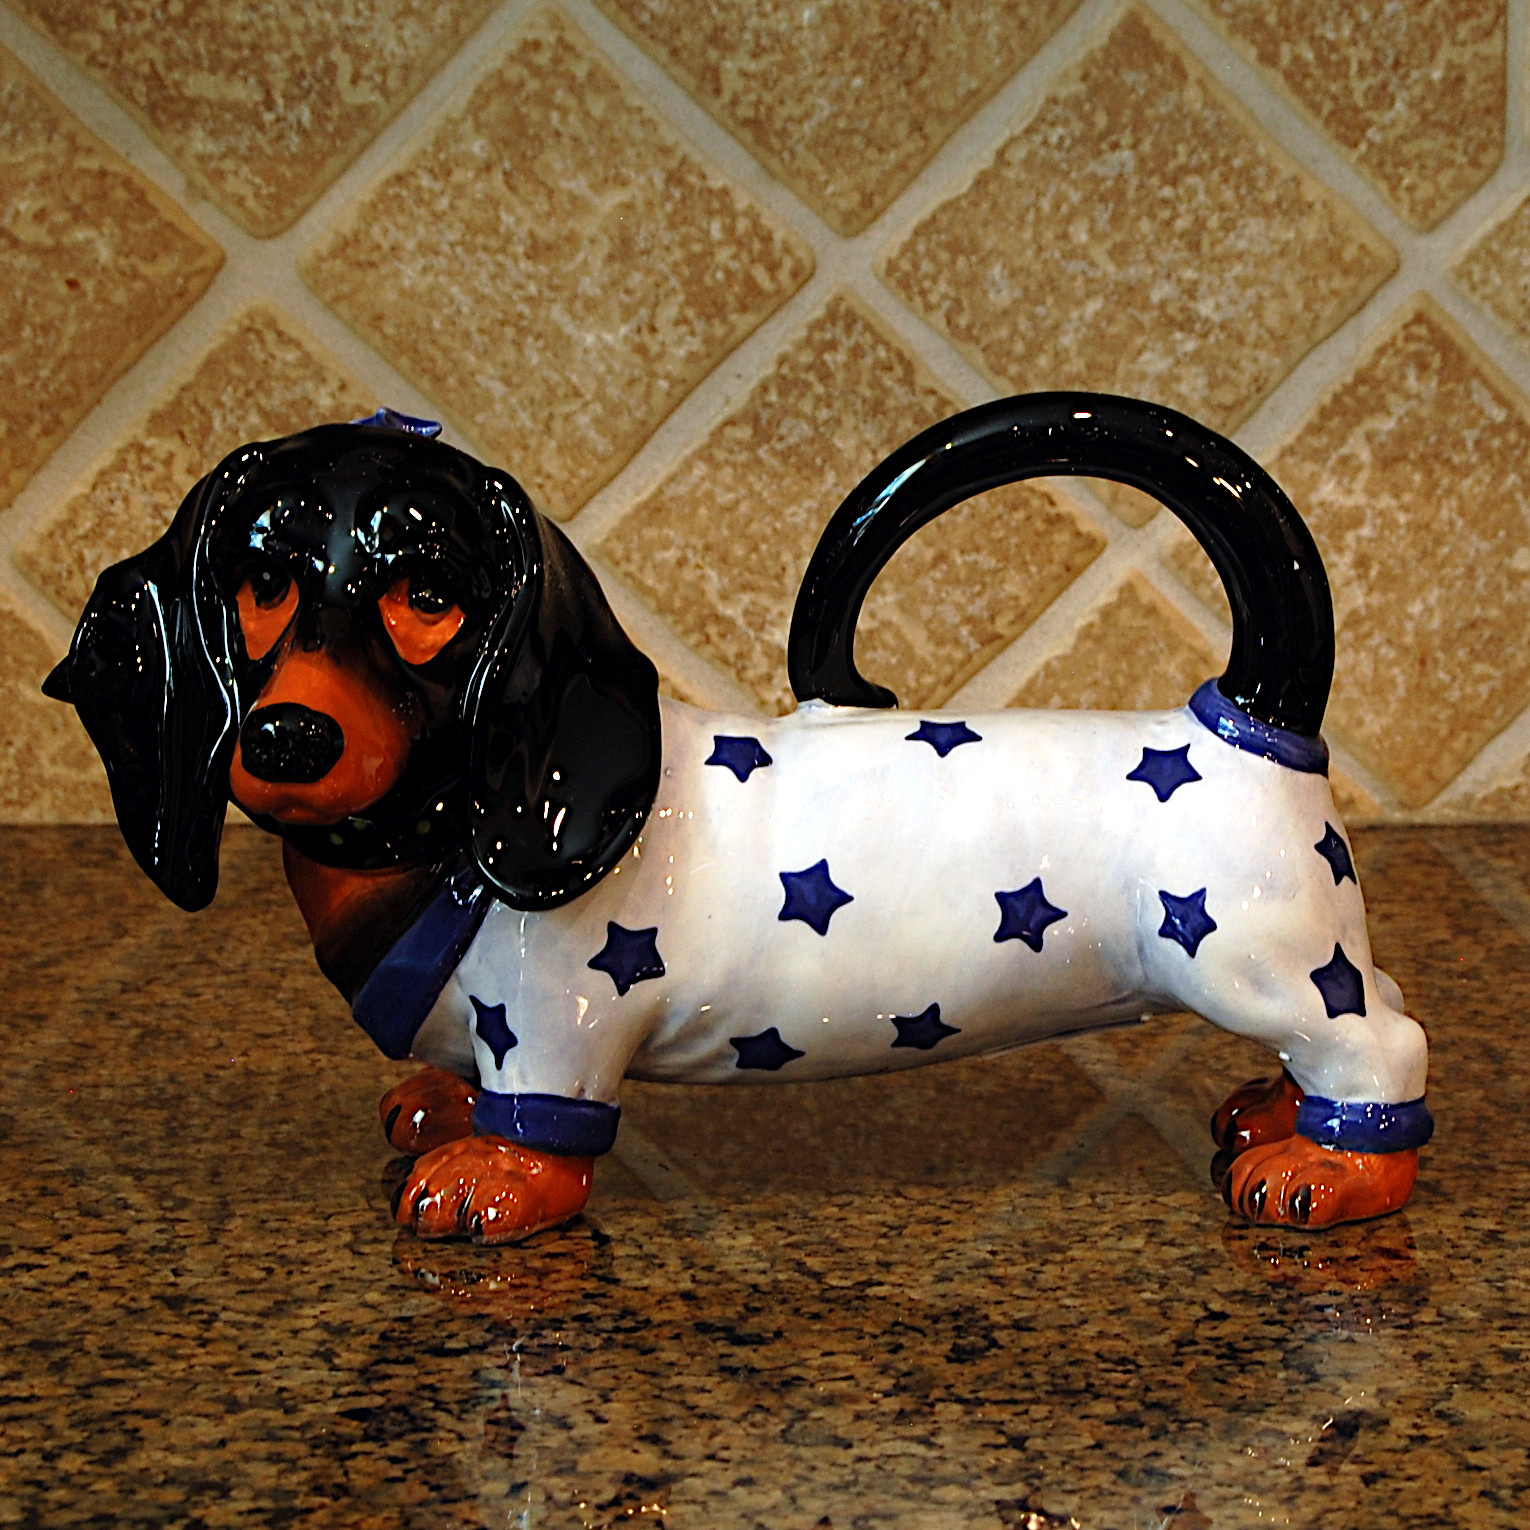 This Willie Dachshund Dog Teapot Collectible Decorative Home Décor Blue Sky Clayworks is made with love by Premier Homegoods! Shop more unique gift ideas today with Spots Initiatives, the best way to support creators.